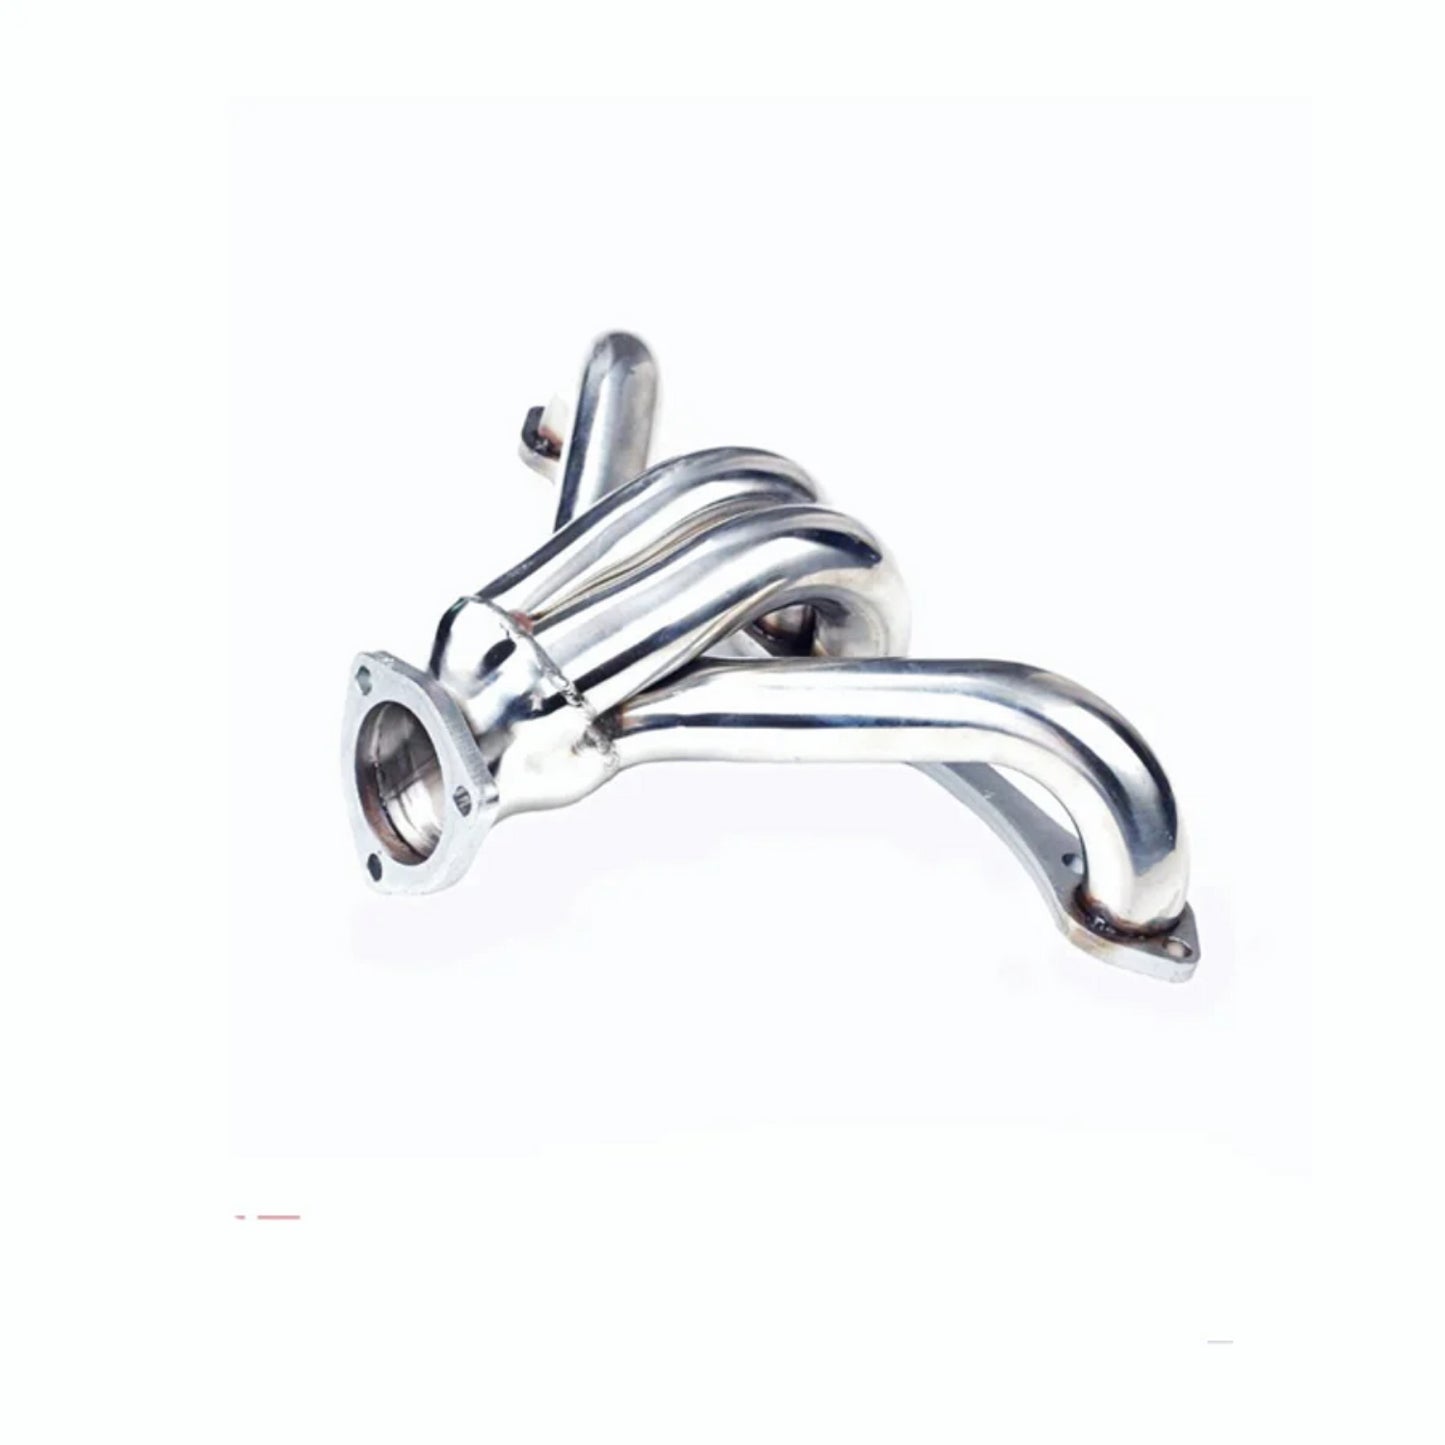 Stainless Racing Manifold Shorty Header Exhaust for 1970-1996 Chevy Small Block  283-305-327-350-400 V8 Engines